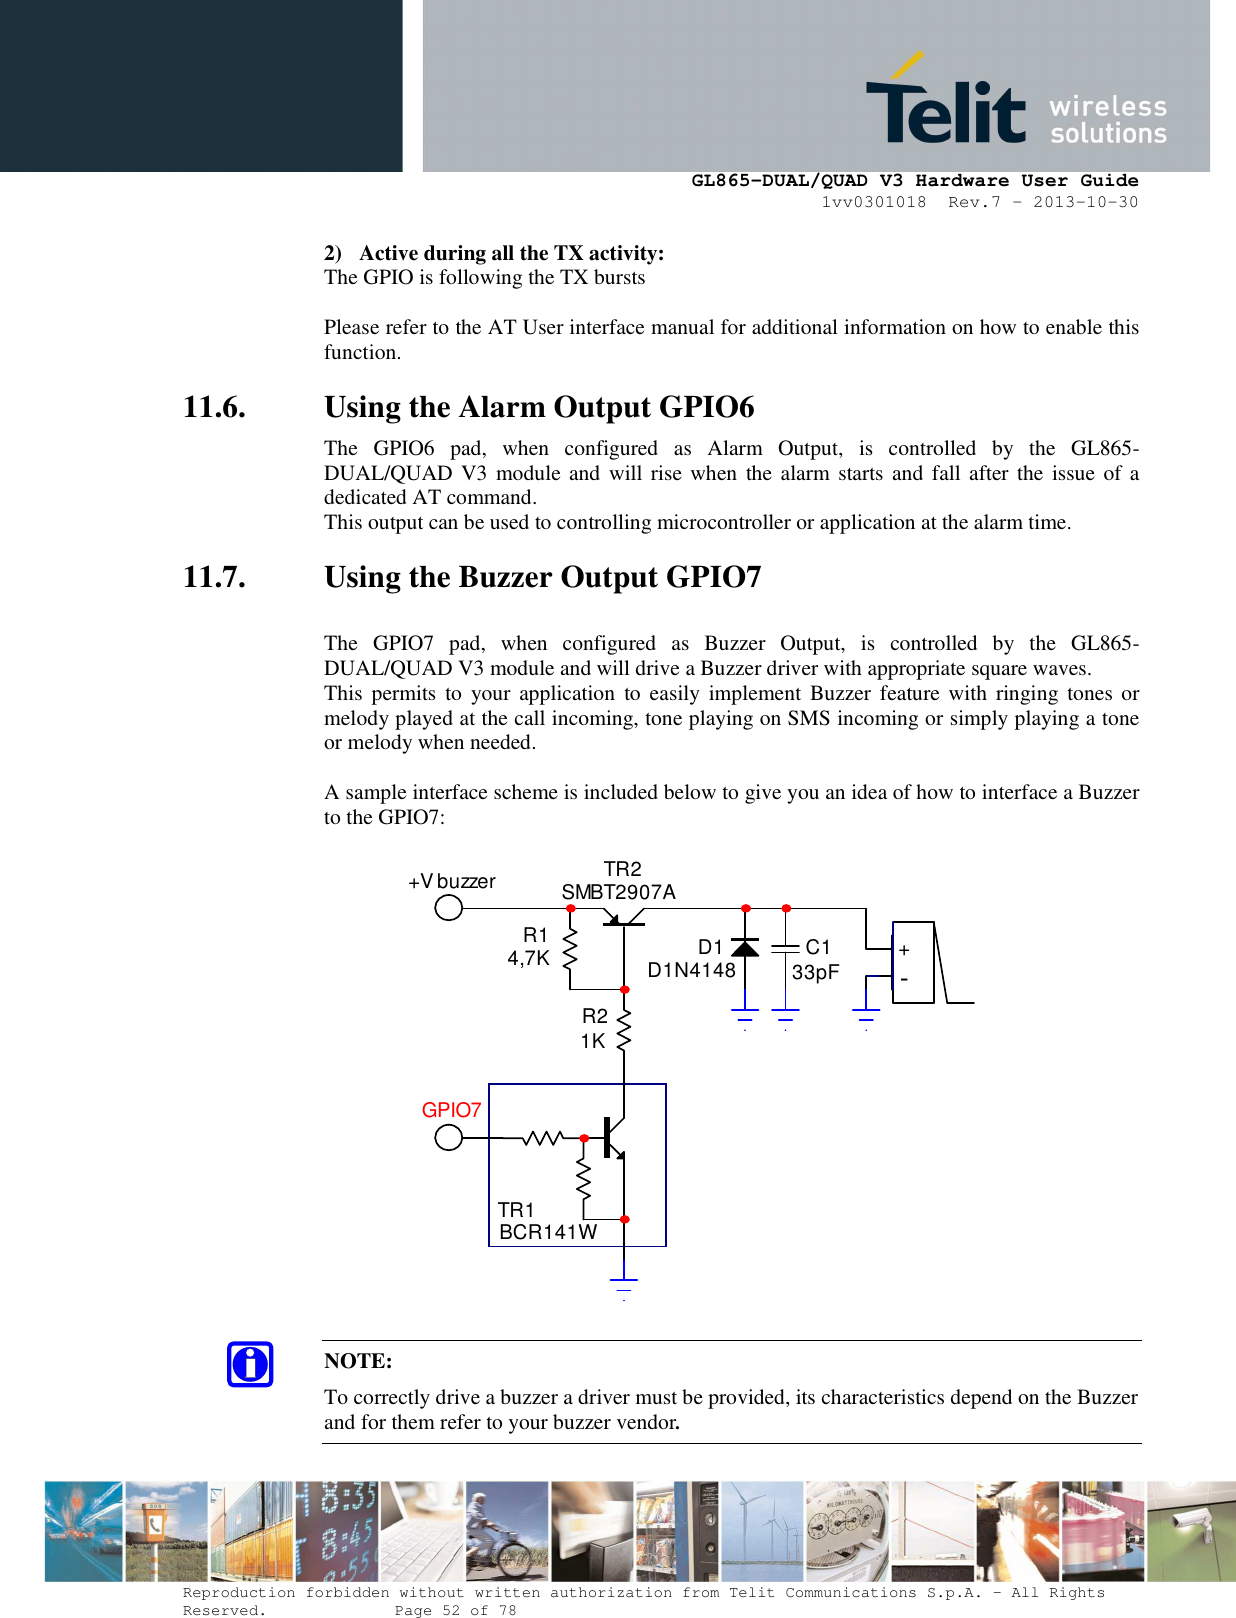      GL865-DUAL/QUAD V3 Hardware User Guide 1vv0301018  Rev.7 – 2013-10-30  Reproduction forbidden without written authorization from Telit Communications S.p.A. - All Rights Reserved.    Page 52 of 78 Mod. 0805 2011-07 Rev.2 2) Active during all the TX activity: The GPIO is following the TX bursts  Please refer to the AT User interface manual for additional information on how to enable this function. 11.6. Using the Alarm Output GPIO6 The  GPIO6  pad,  when  configured  as  Alarm  Output,  is  controlled  by  the  GL865-DUAL/QUAD V3 module and  will rise when  the alarm  starts and  fall after  the  issue of a dedicated AT command. This output can be used to controlling microcontroller or application at the alarm time. 11.7. Using the Buzzer Output GPIO7  The  GPIO7  pad,  when  configured  as  Buzzer  Output,  is  controlled  by  the  GL865-DUAL/QUAD V3 module and will drive a Buzzer driver with appropriate square waves. This  permits to  your  application  to  easily  implement  Buzzer  feature with  ringing  tones or melody played at the call incoming, tone playing on SMS incoming or simply playing a tone or melody when needed.  A sample interface scheme is included below to give you an idea of how to interface a Buzzer to the GPIO7:  TR1BCR141WTR2SMBT2907AR14,7KR21KD1D1N4148 C133pF +-+V buzzerGPIO7 NOTE: To correctly drive a buzzer a driver must be provided, its characteristics depend on the Buzzer and for them refer to your buzzer vendor.   